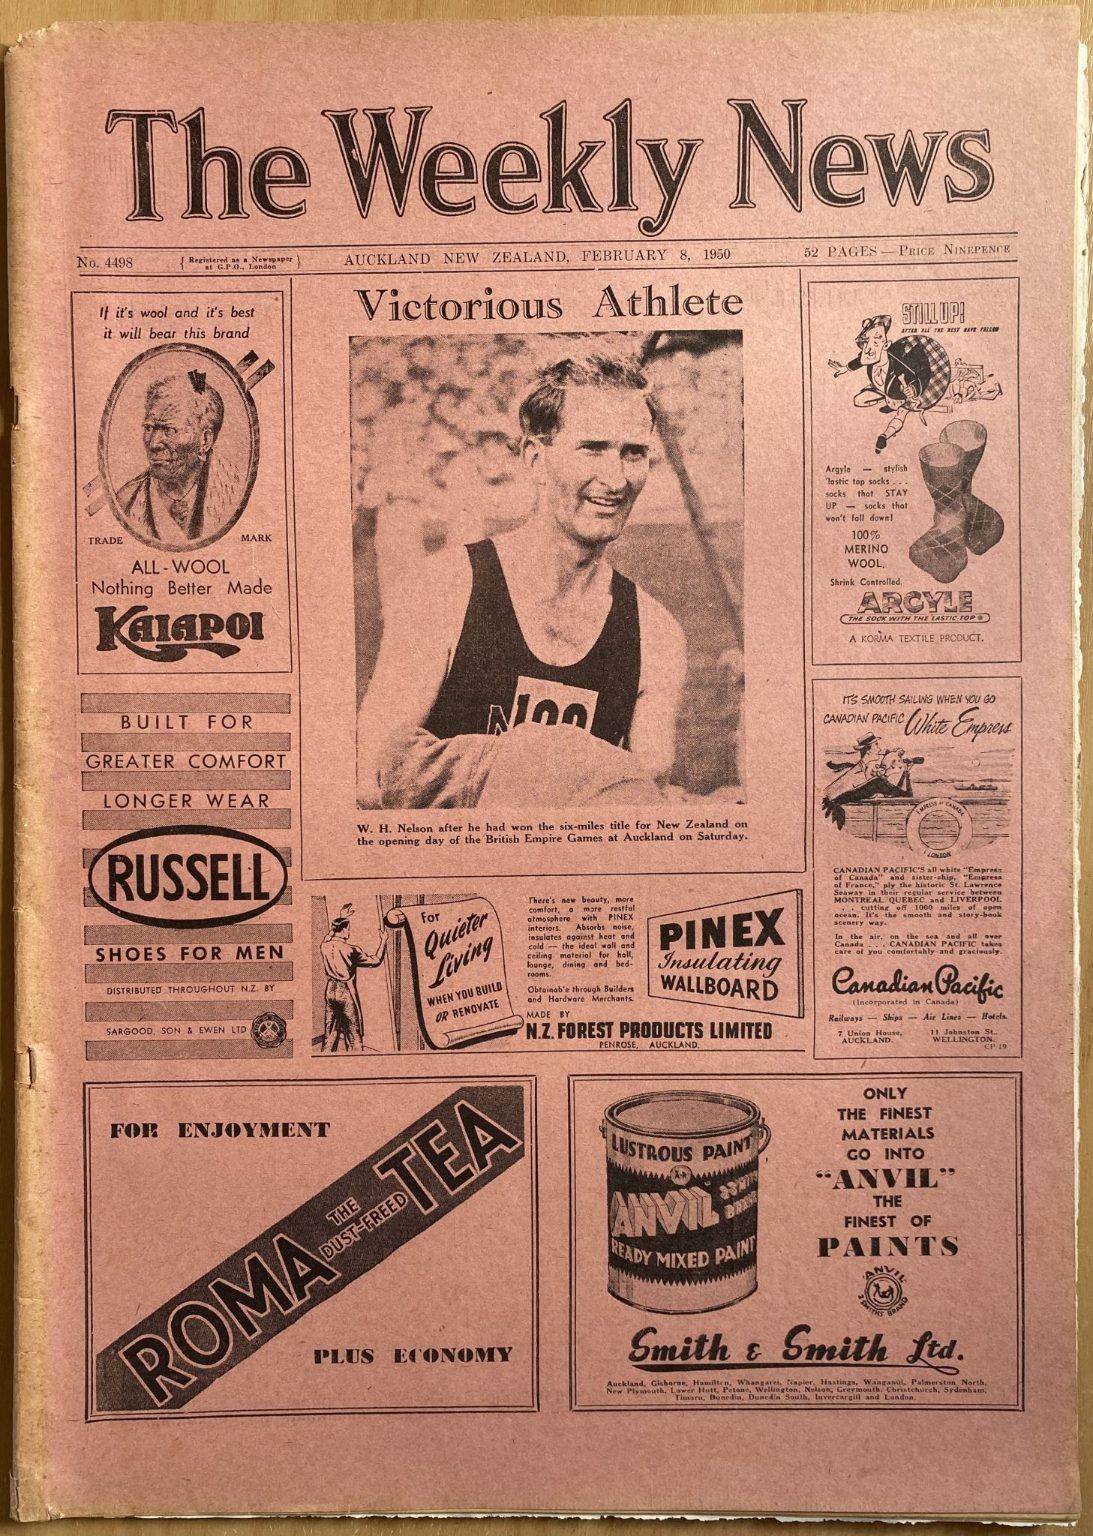 OLD NEWSPAPER: The Weekly News, No. 4498, 8 February 1950